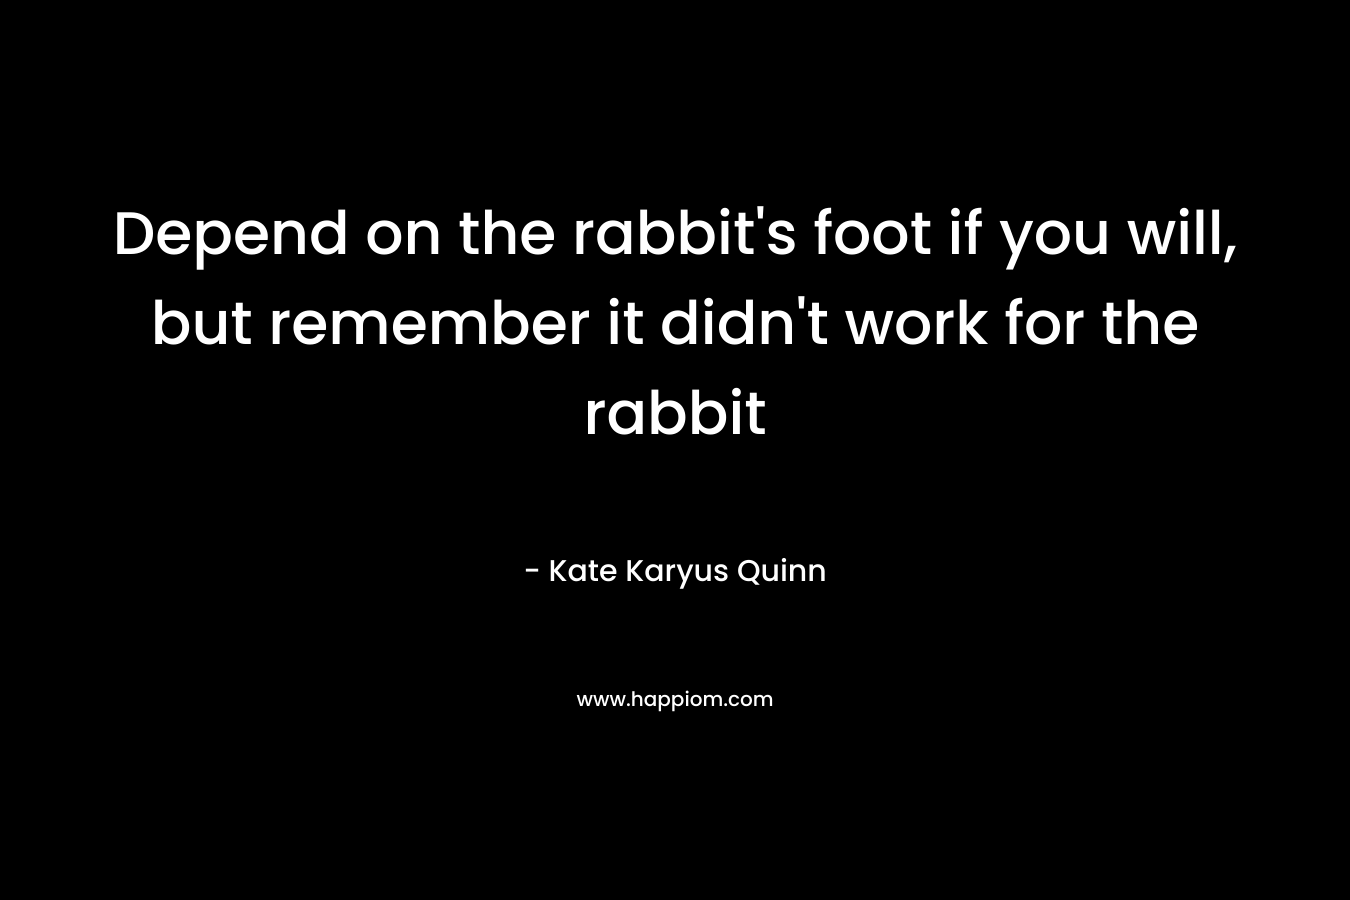 Depend on the rabbit’s foot if you will, but remember it didn’t work for the rabbit – Kate Karyus Quinn